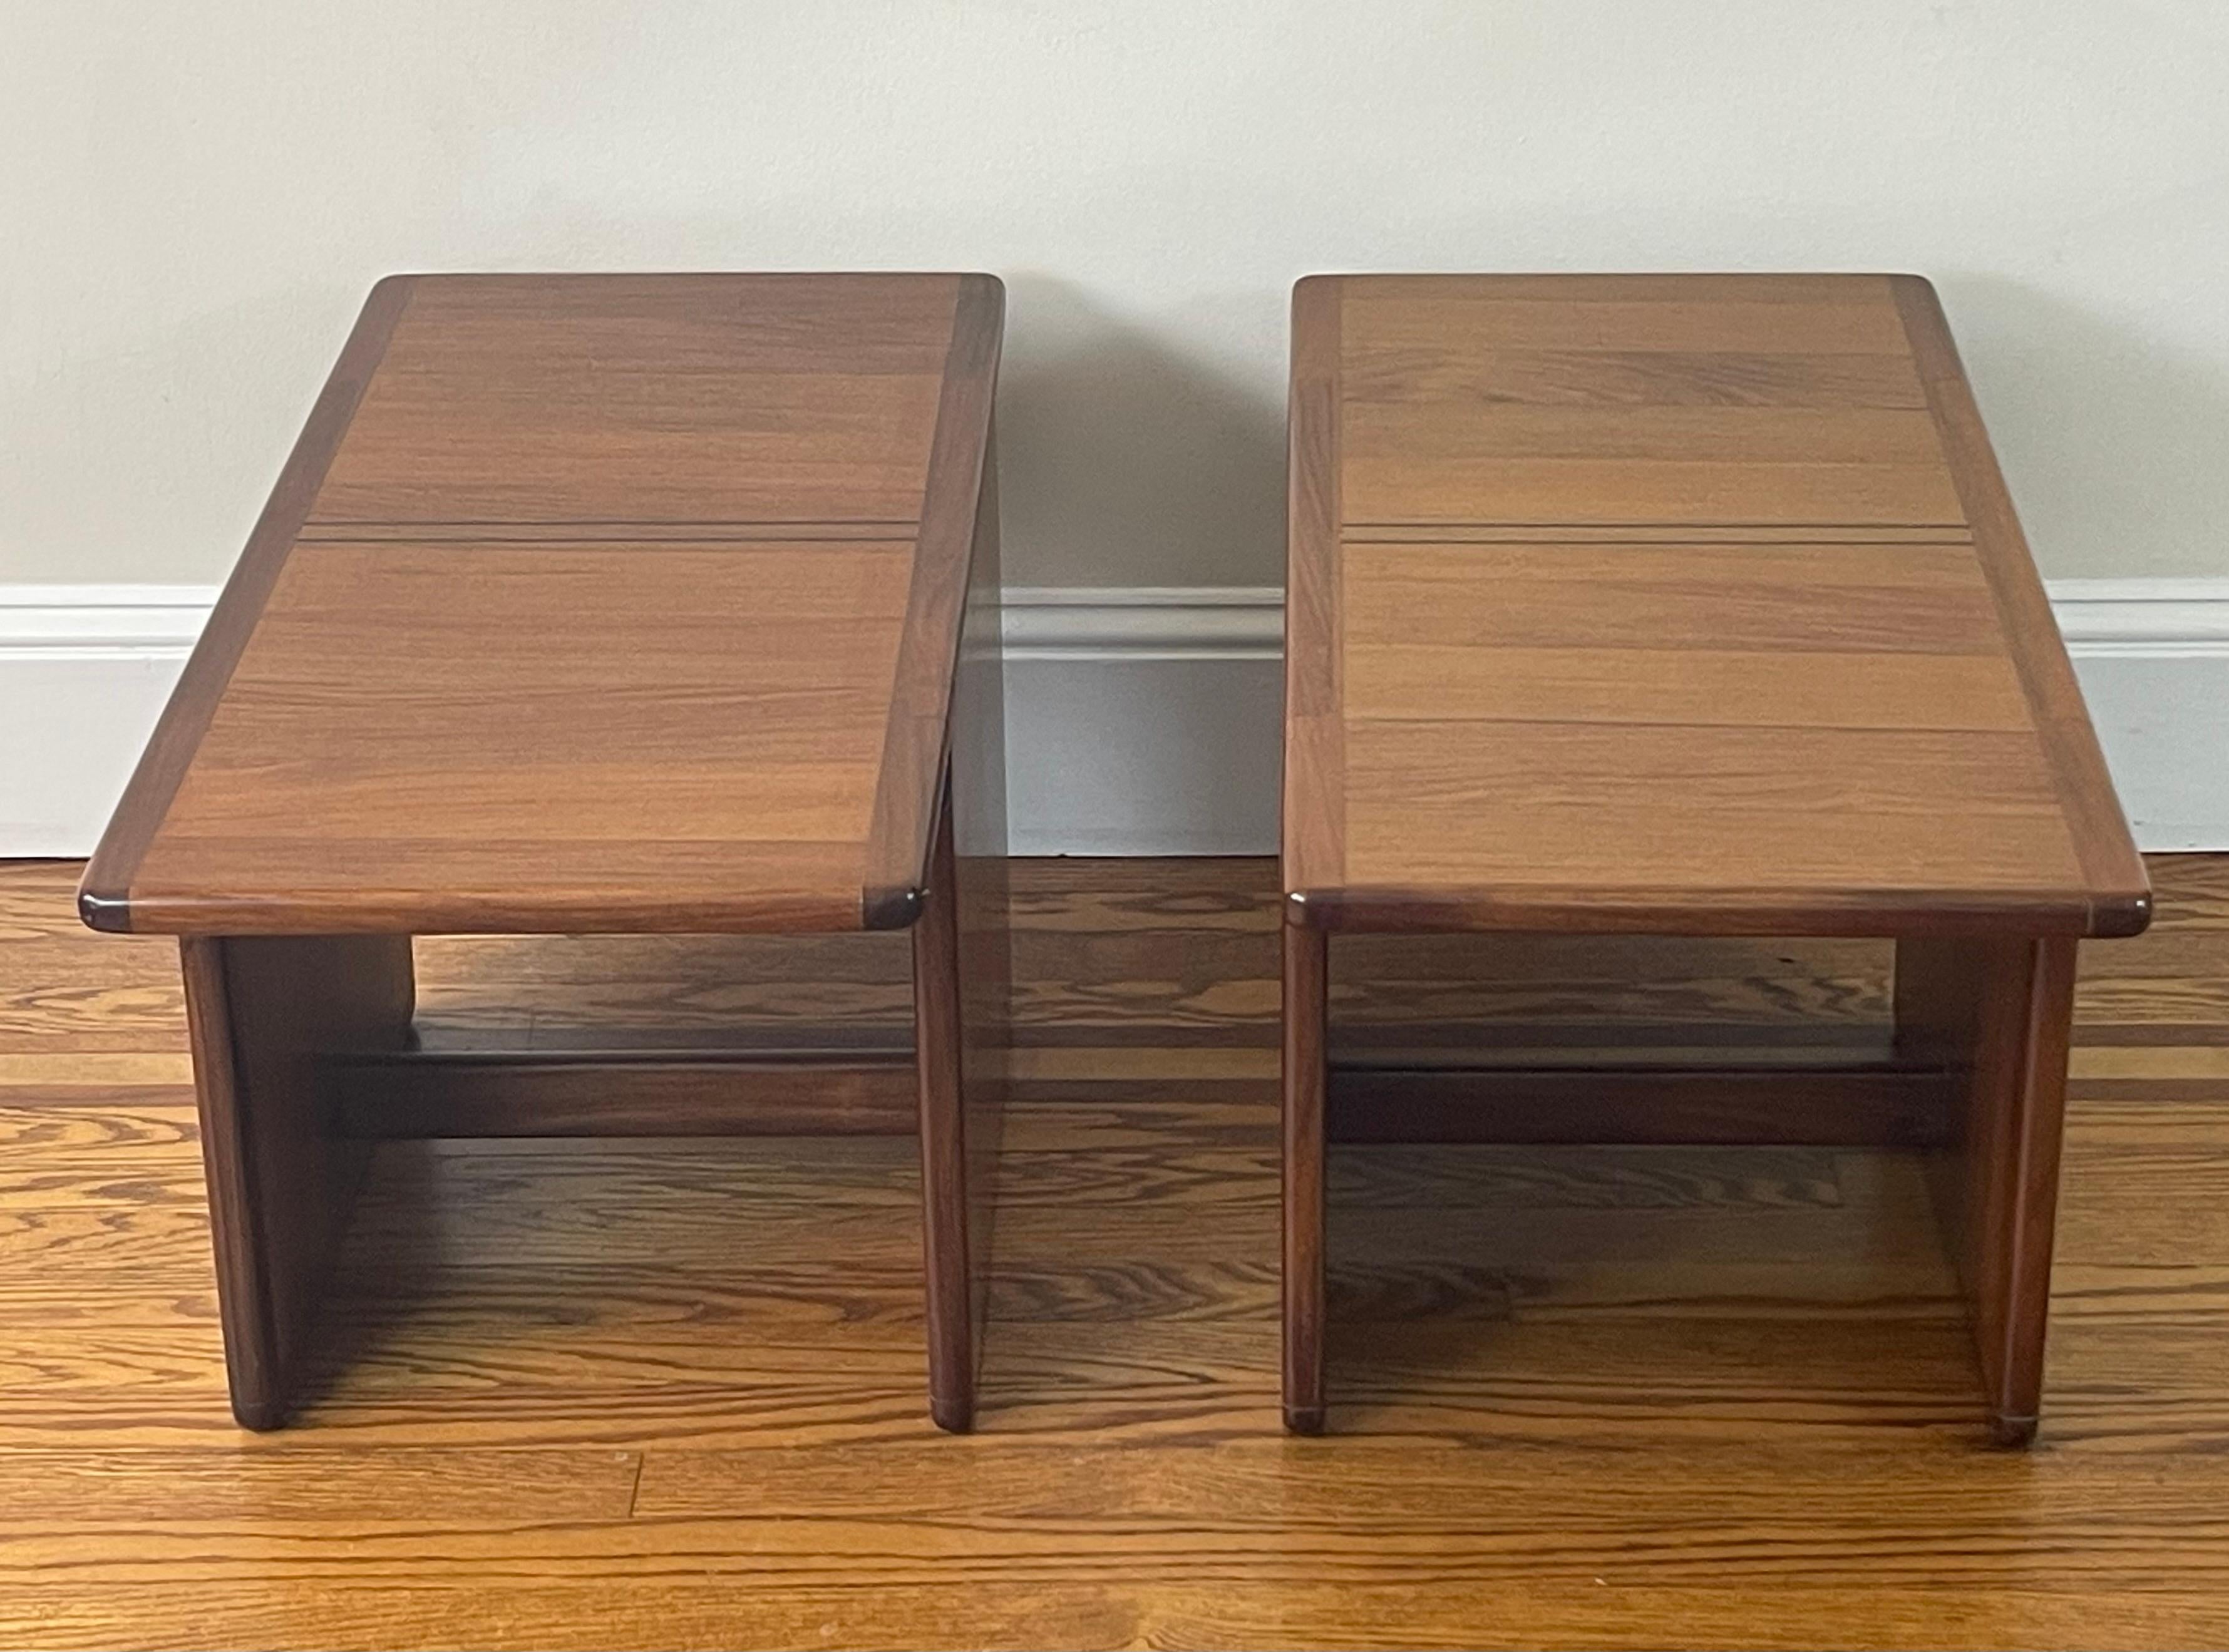 Afra and Tobia Scarpa Artona Coffee Tables In Good Condition For Sale In Belle Mead, NJ